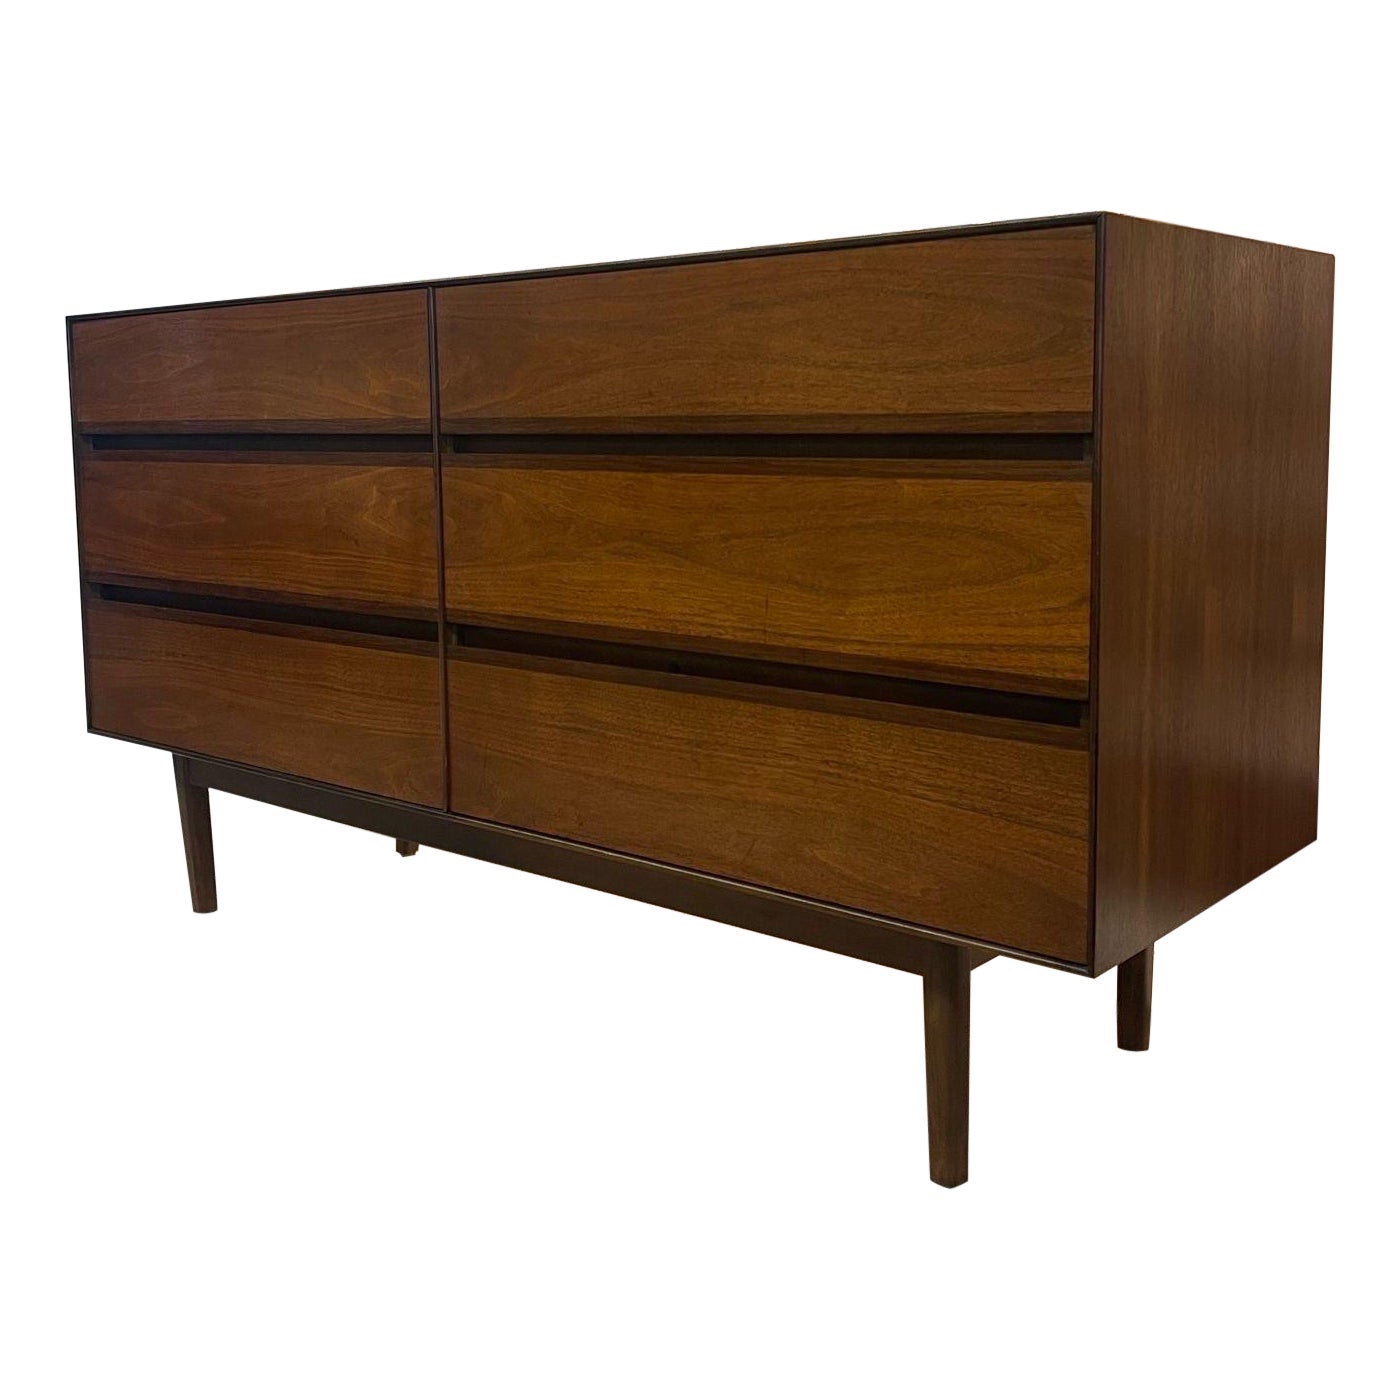 Vintage Mid Century Modern Low Six Drawer Dresser by Modernaire. For Sale